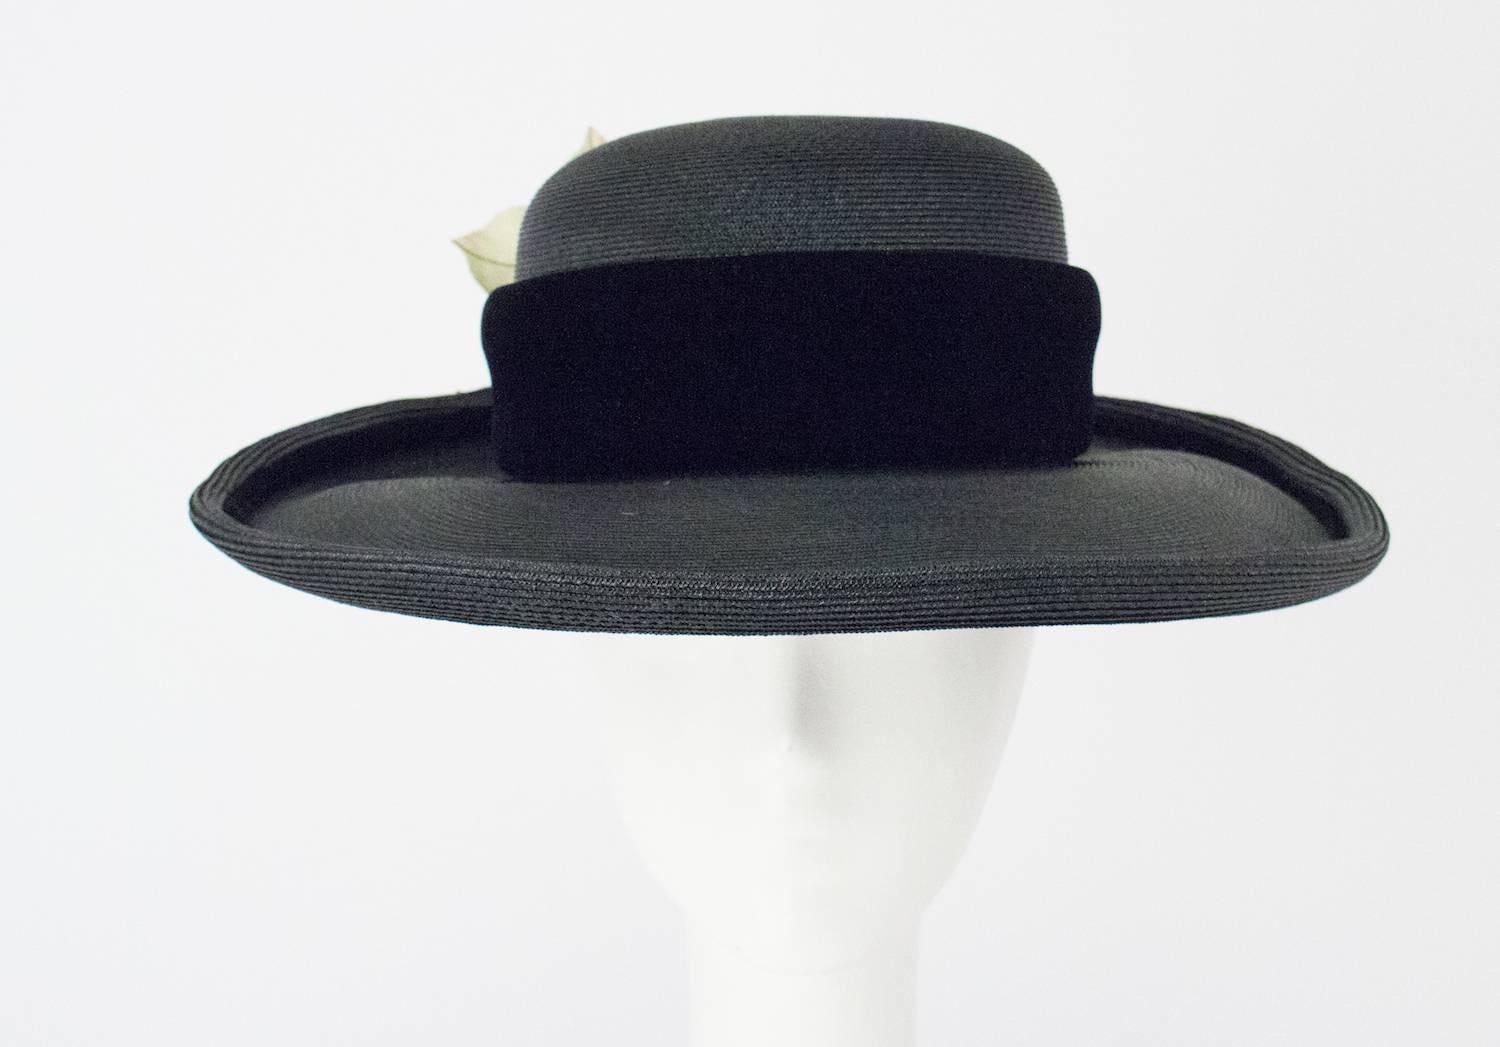 80s Christian Dior Black Straw Wide Brim Hat with Velvet Trim and Red Rose. Leaves of Rose have wire in stem for shaping. Rose has some velvet petals. Grosgrain interior hat band. 

Measurements:
Interior circumference: 20 3/4 inches
Brim width: